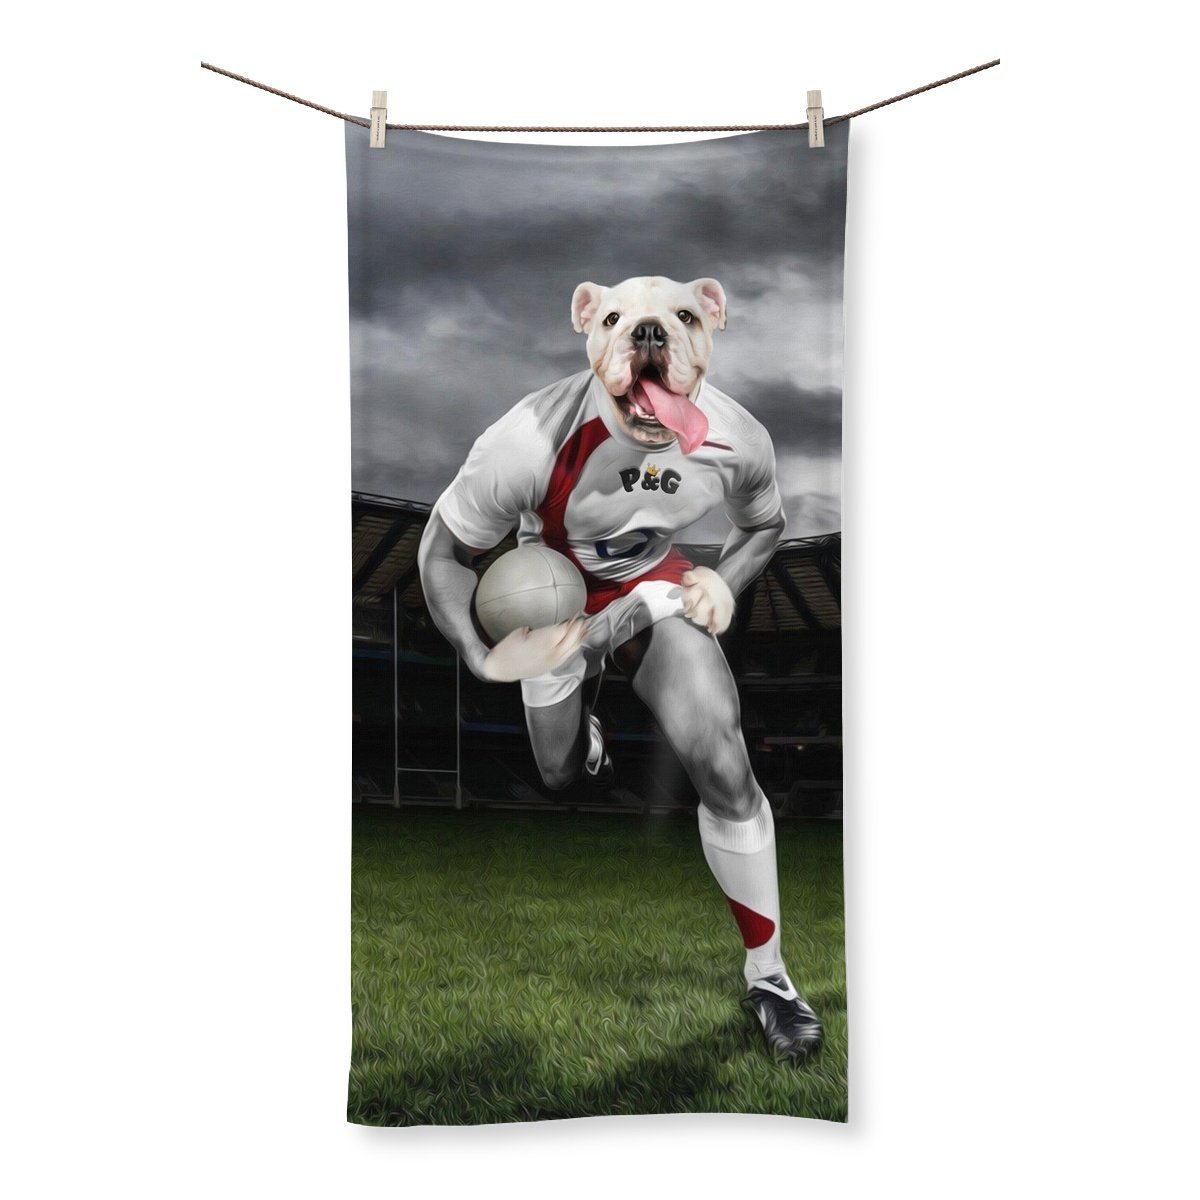 The Rugby Winger: Custom Pet Towel - Paw & Glory - #pet portraits# - #dog portraits# - #pet portraits uk#Paw & Glory, paw and glory, admiral pet portrait, custom pet paintings, animal portrait pictures, painting of your dog, hogwarts dog houses, aristocratic dog portraits, pet portraits,pet portraits Towel